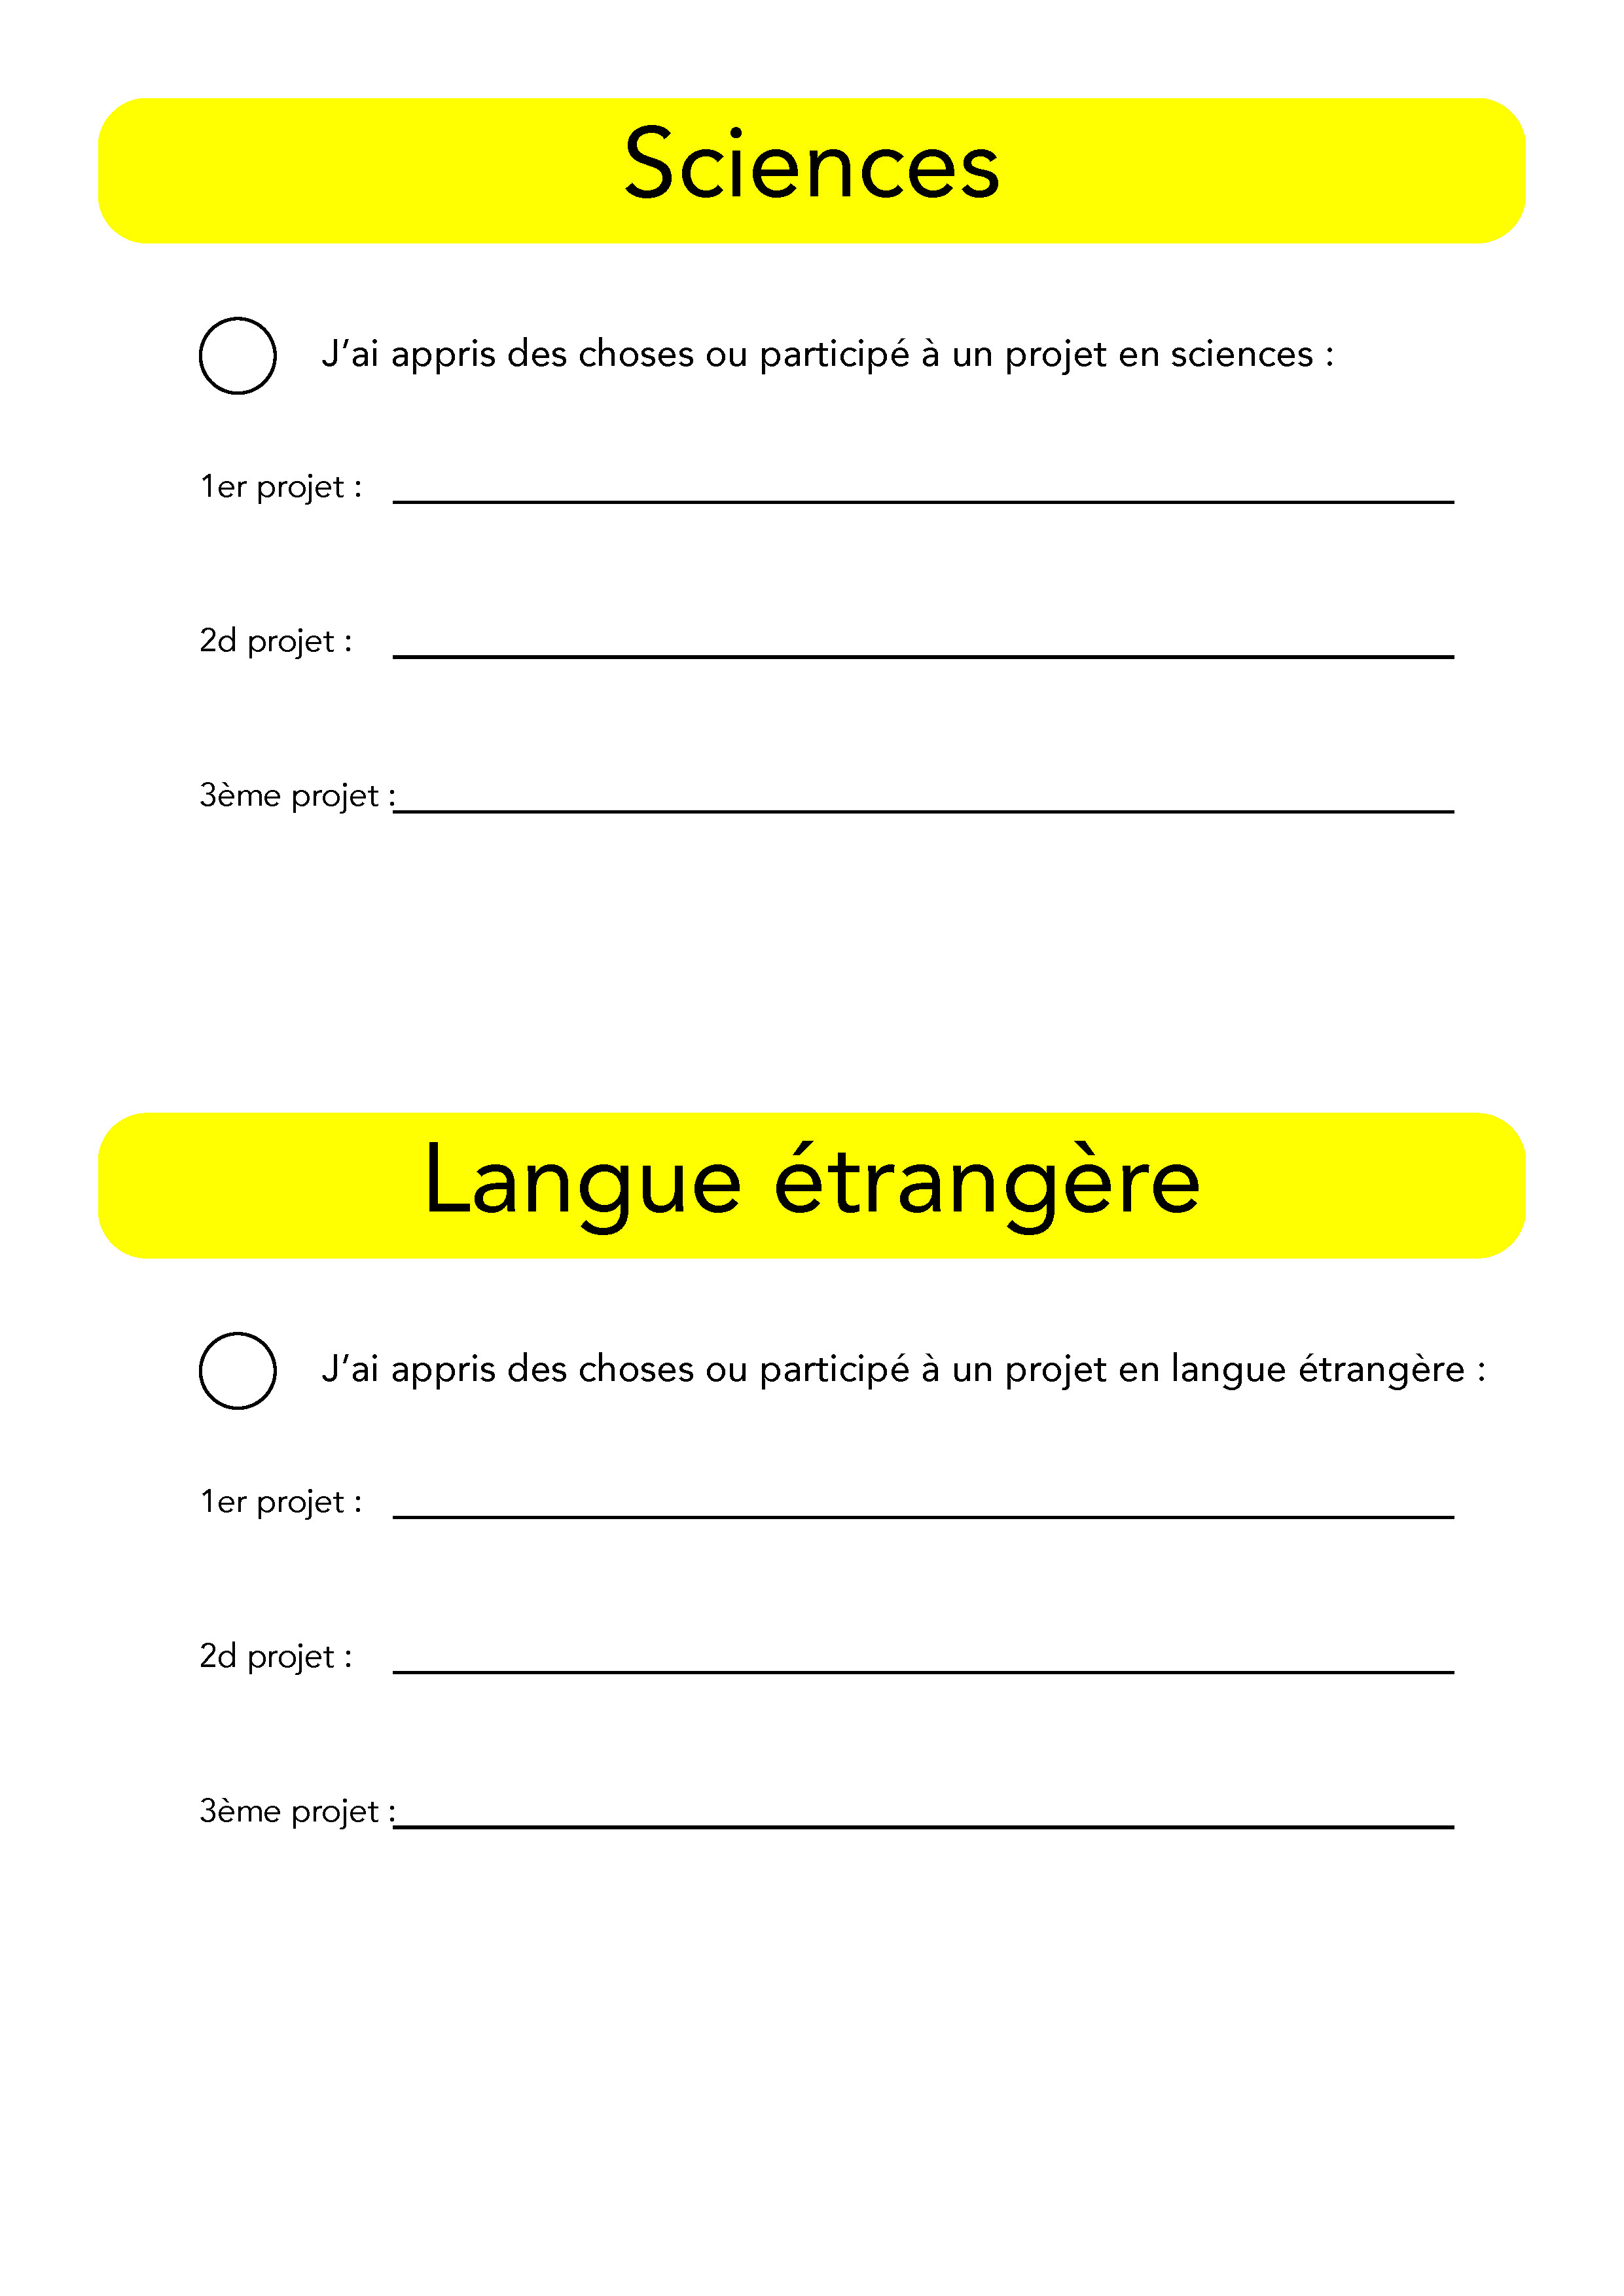 image parcoursjaune2_Page_7.jpg (1.1MB)